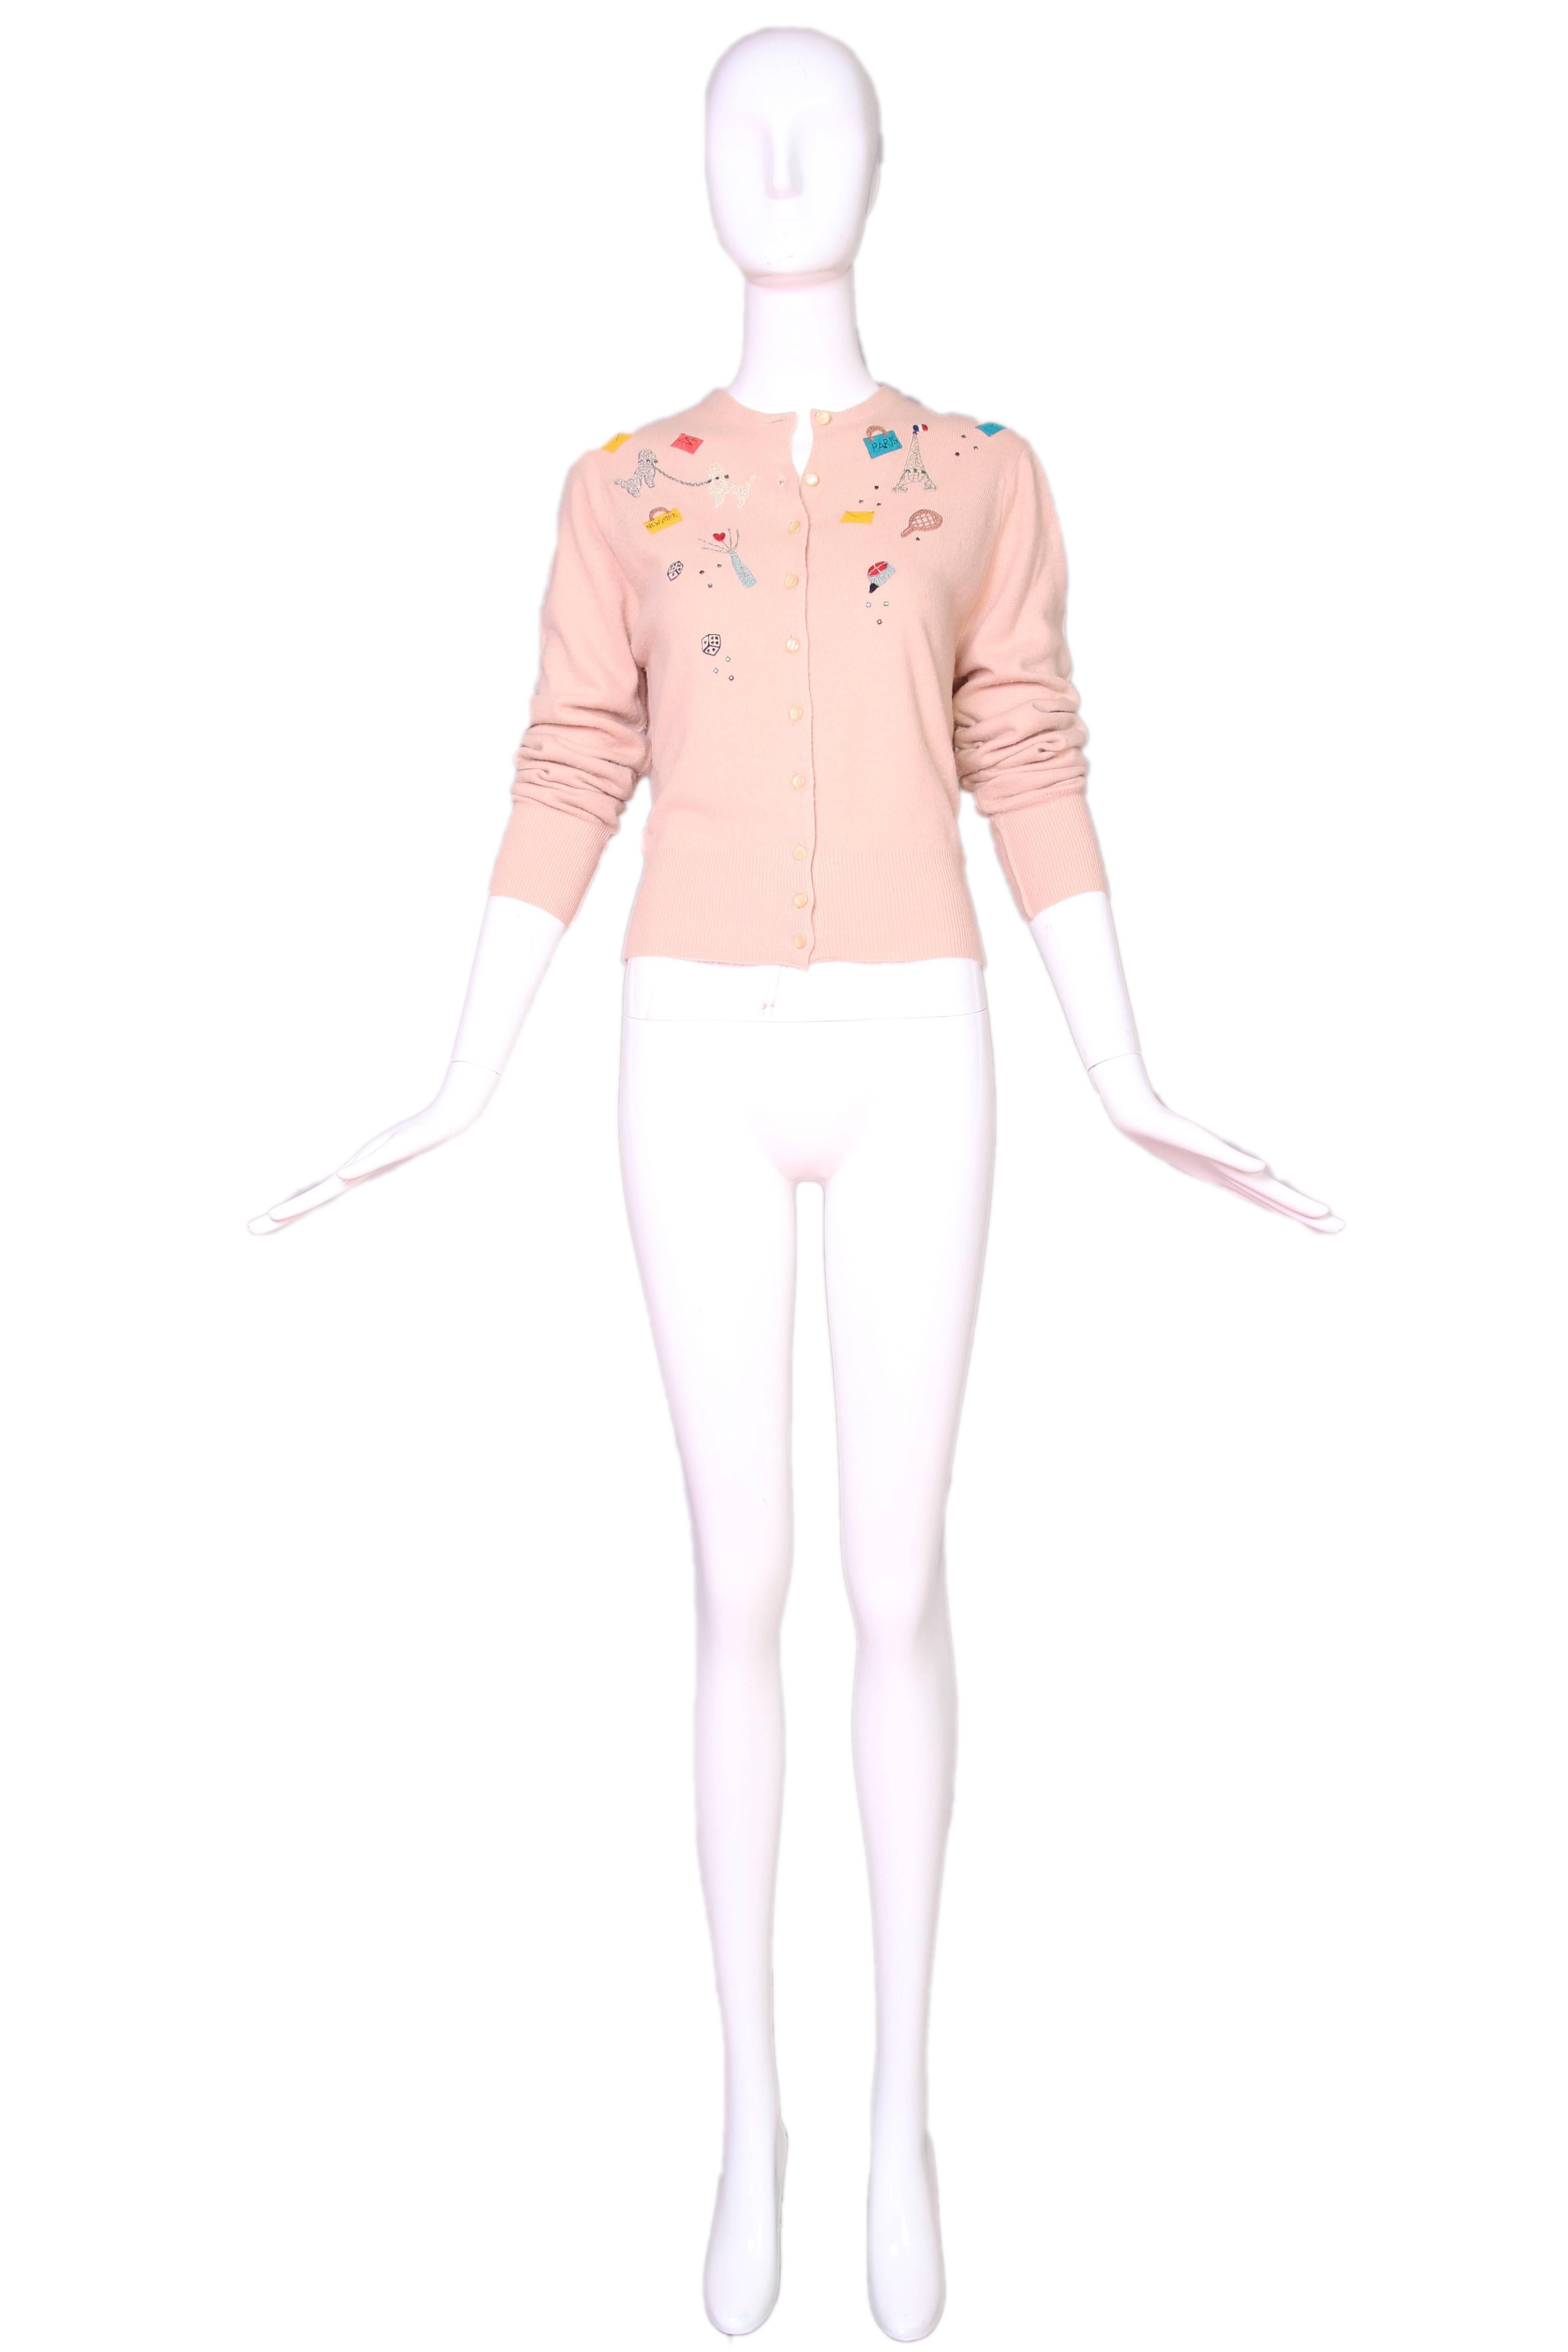 Vintage Schiaparelli label pale pink cashmere cardigan with novelty travel theme and pearlized buttons. In excellent condition. No size tag.
MEASUREMENTS:
Bust - 34